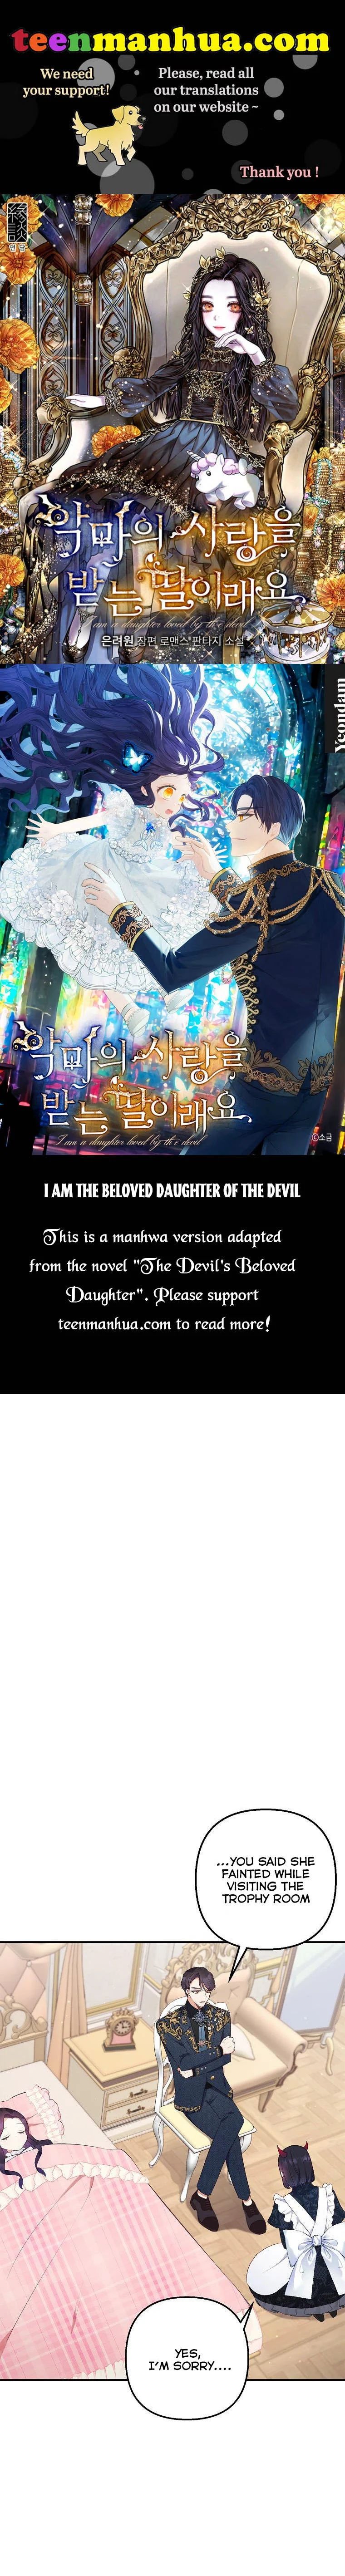 I Am A Daughter Loved By The Devil - Page 1